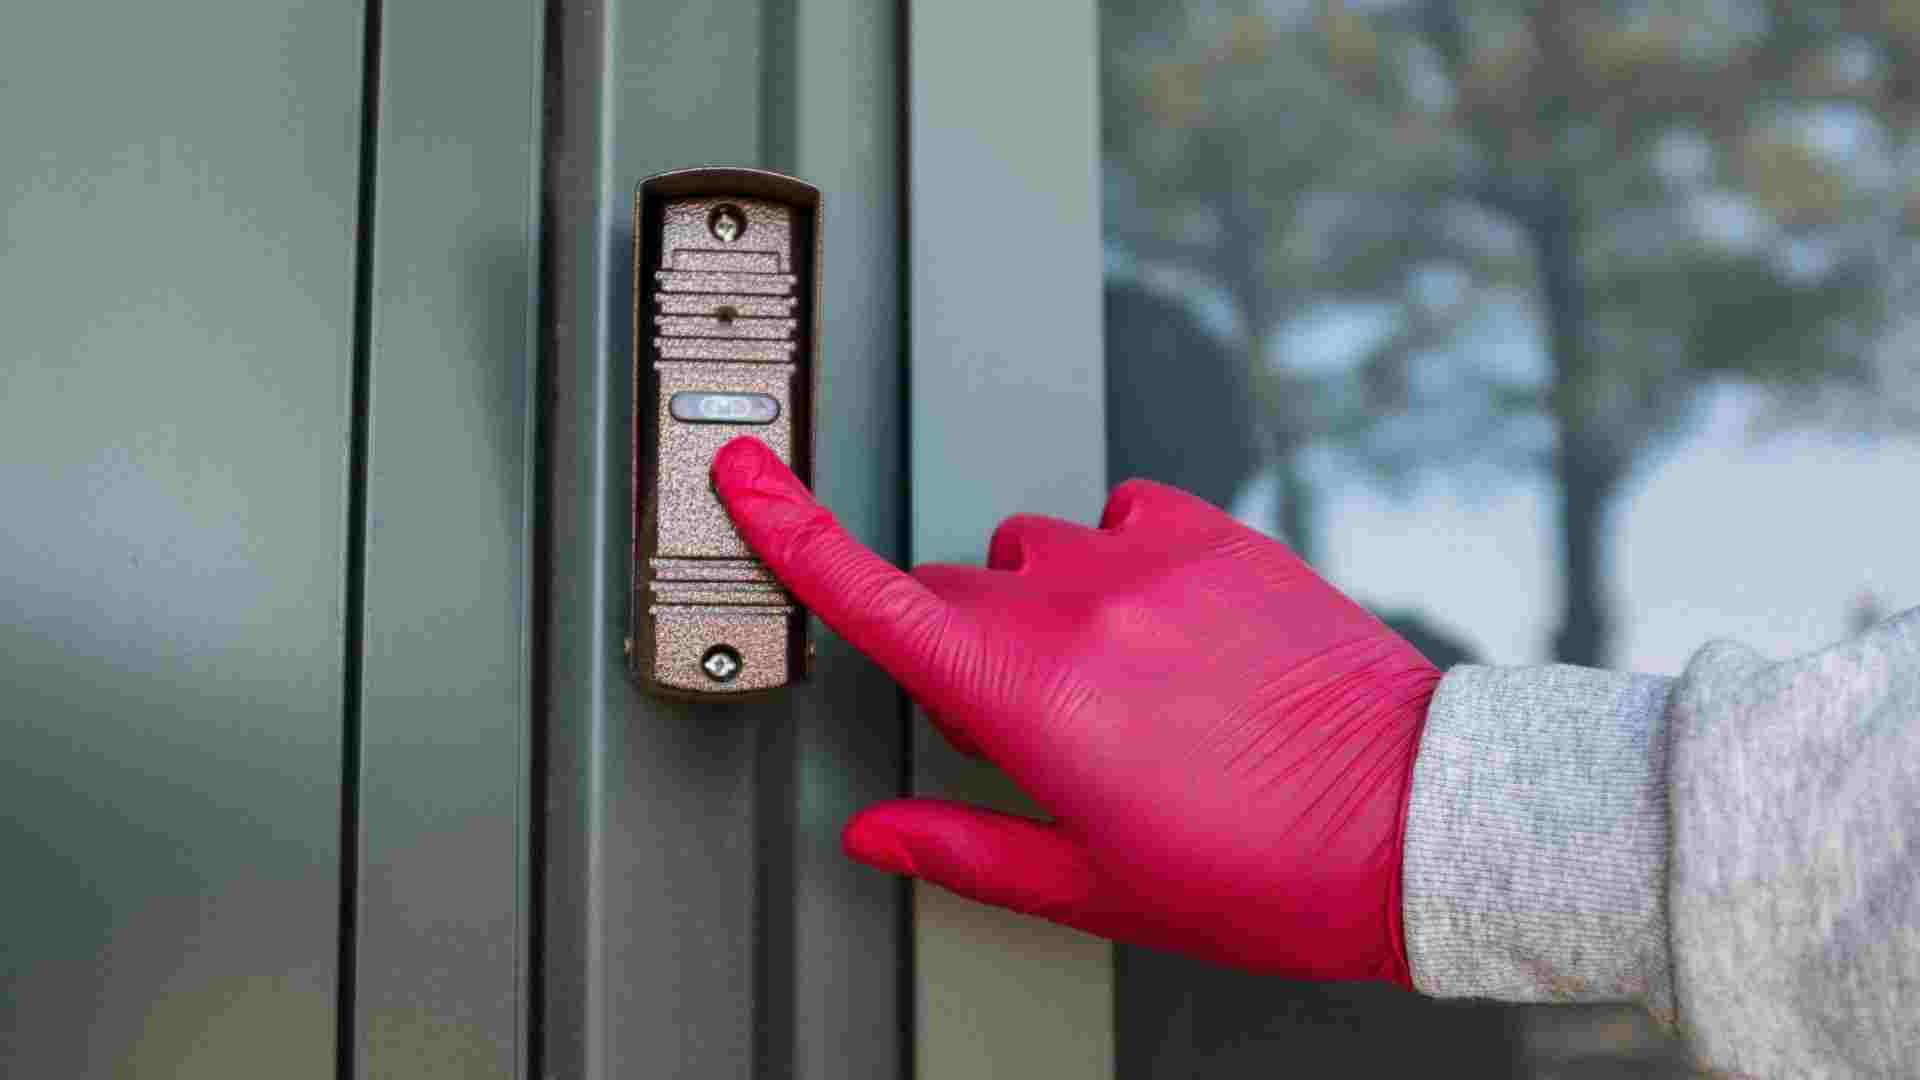 How To Install Ring Doorbell? 3 Easy Steps